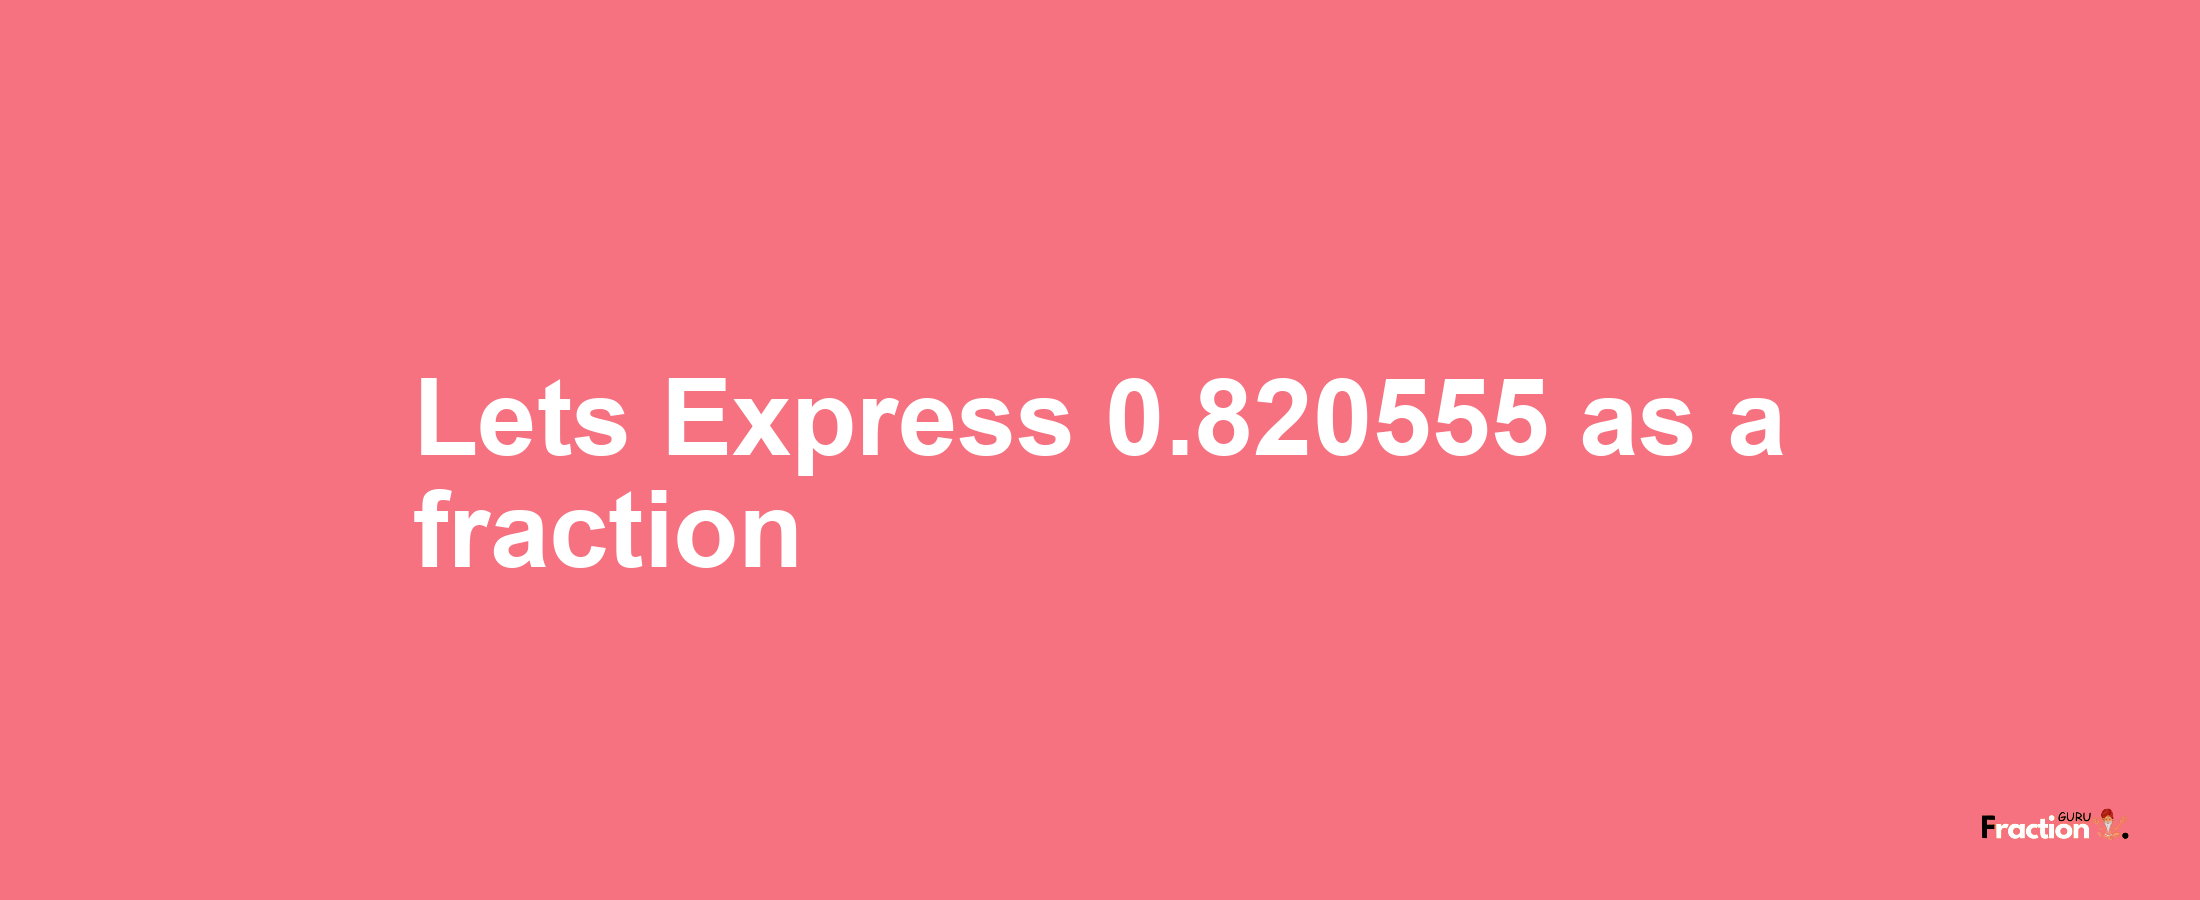 Lets Express 0.820555 as afraction